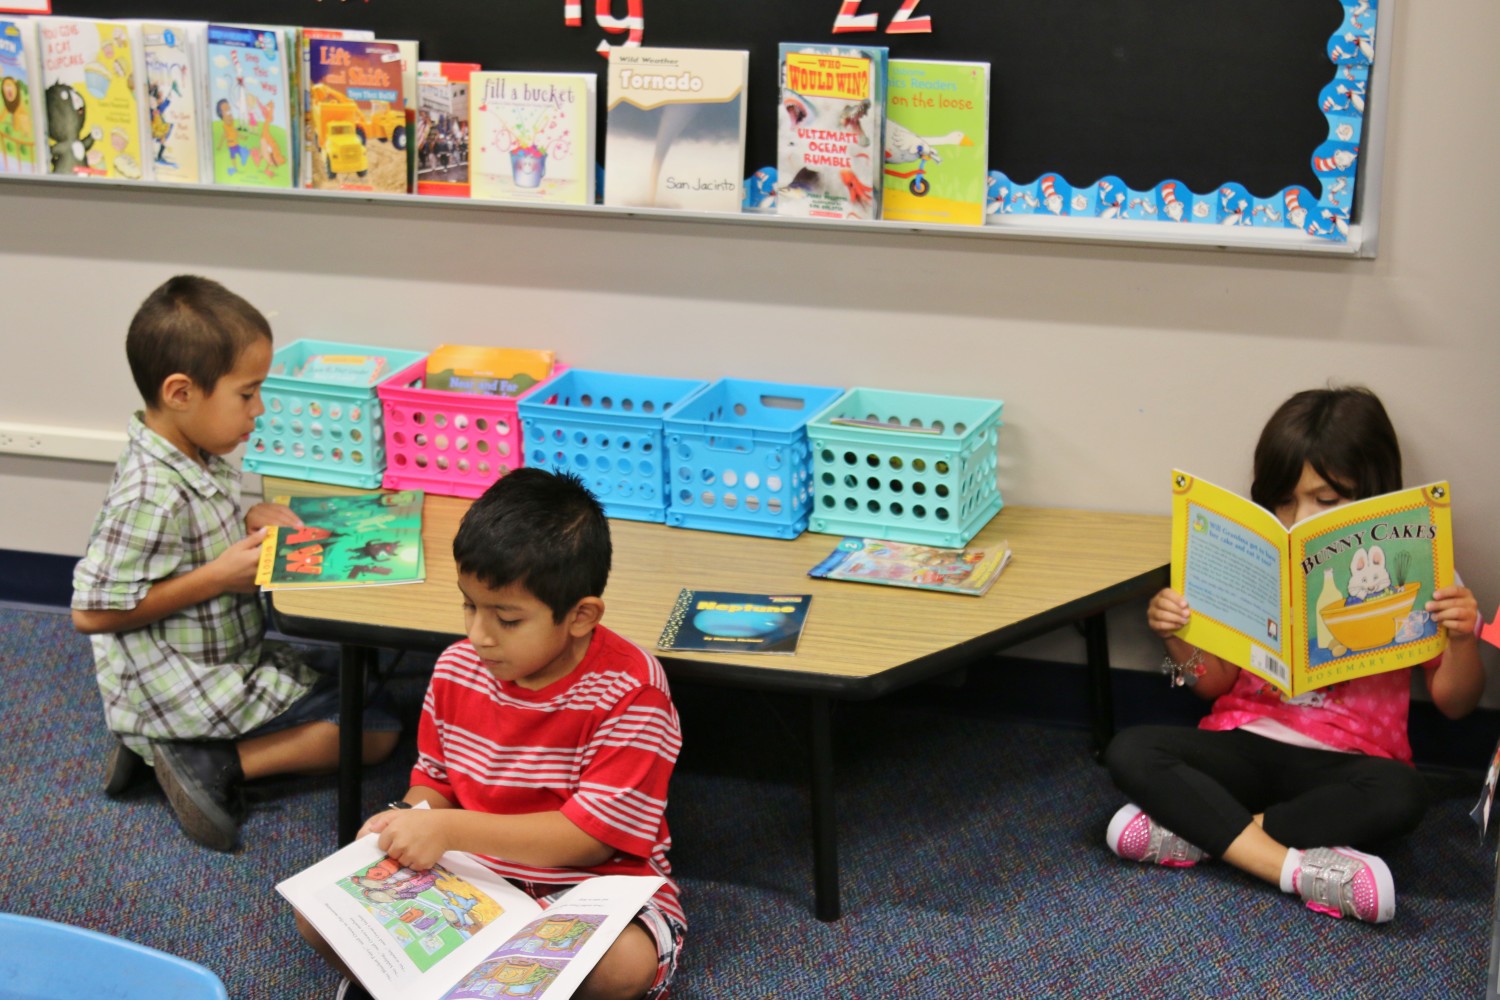 San Jacinto Elementary students enjoy reading with friends.